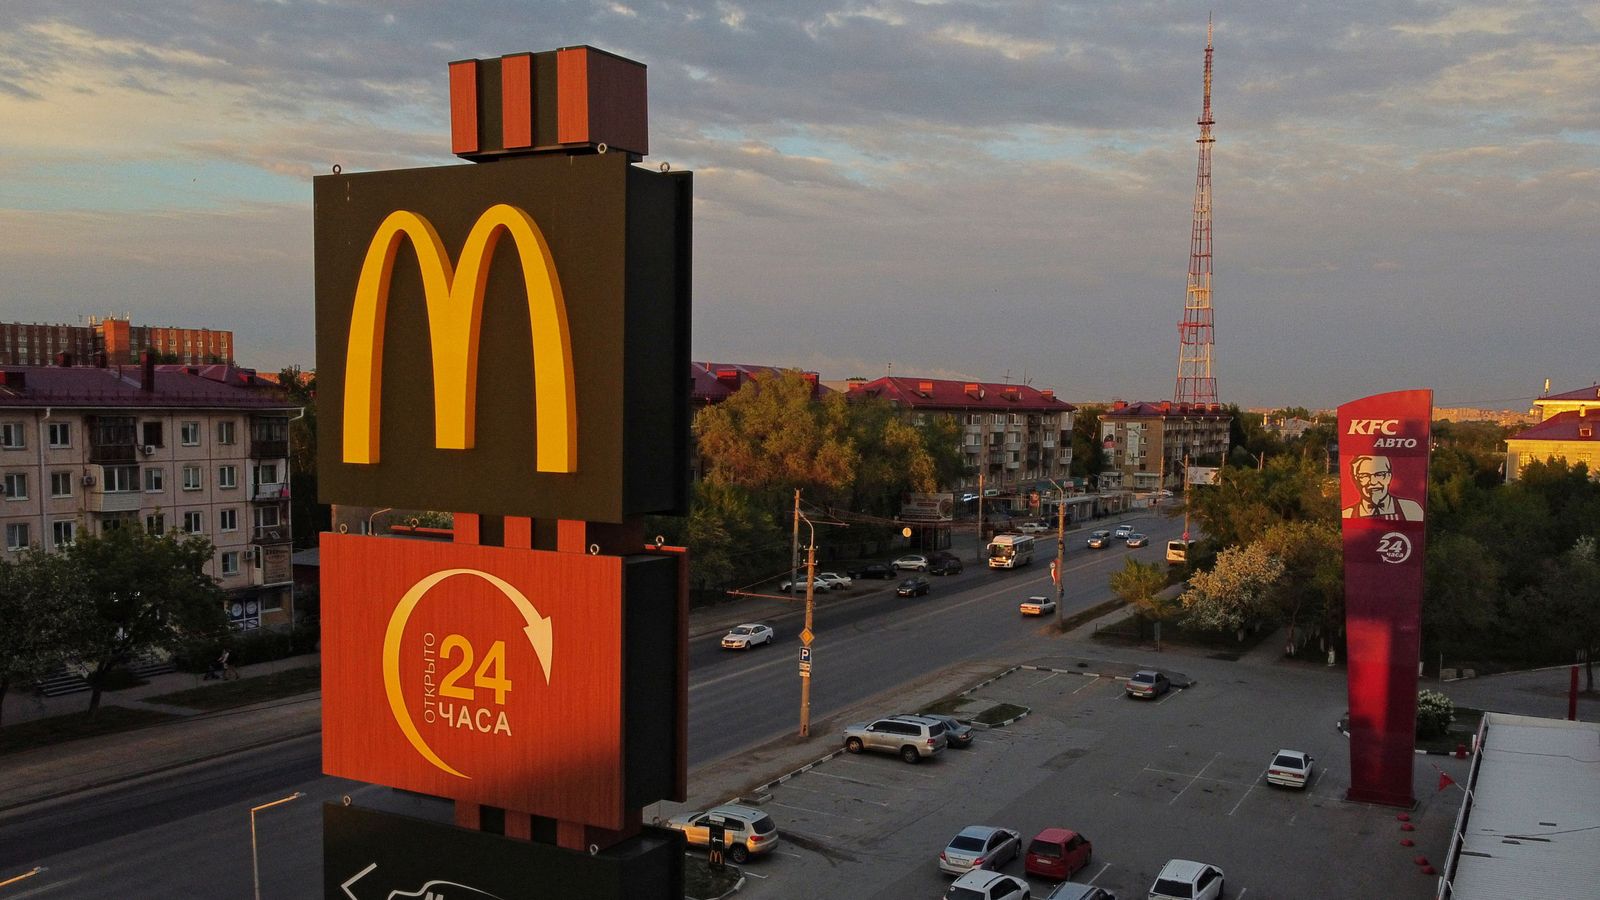 McDonald's restaurants in Russia to reopen under new name after buyer found